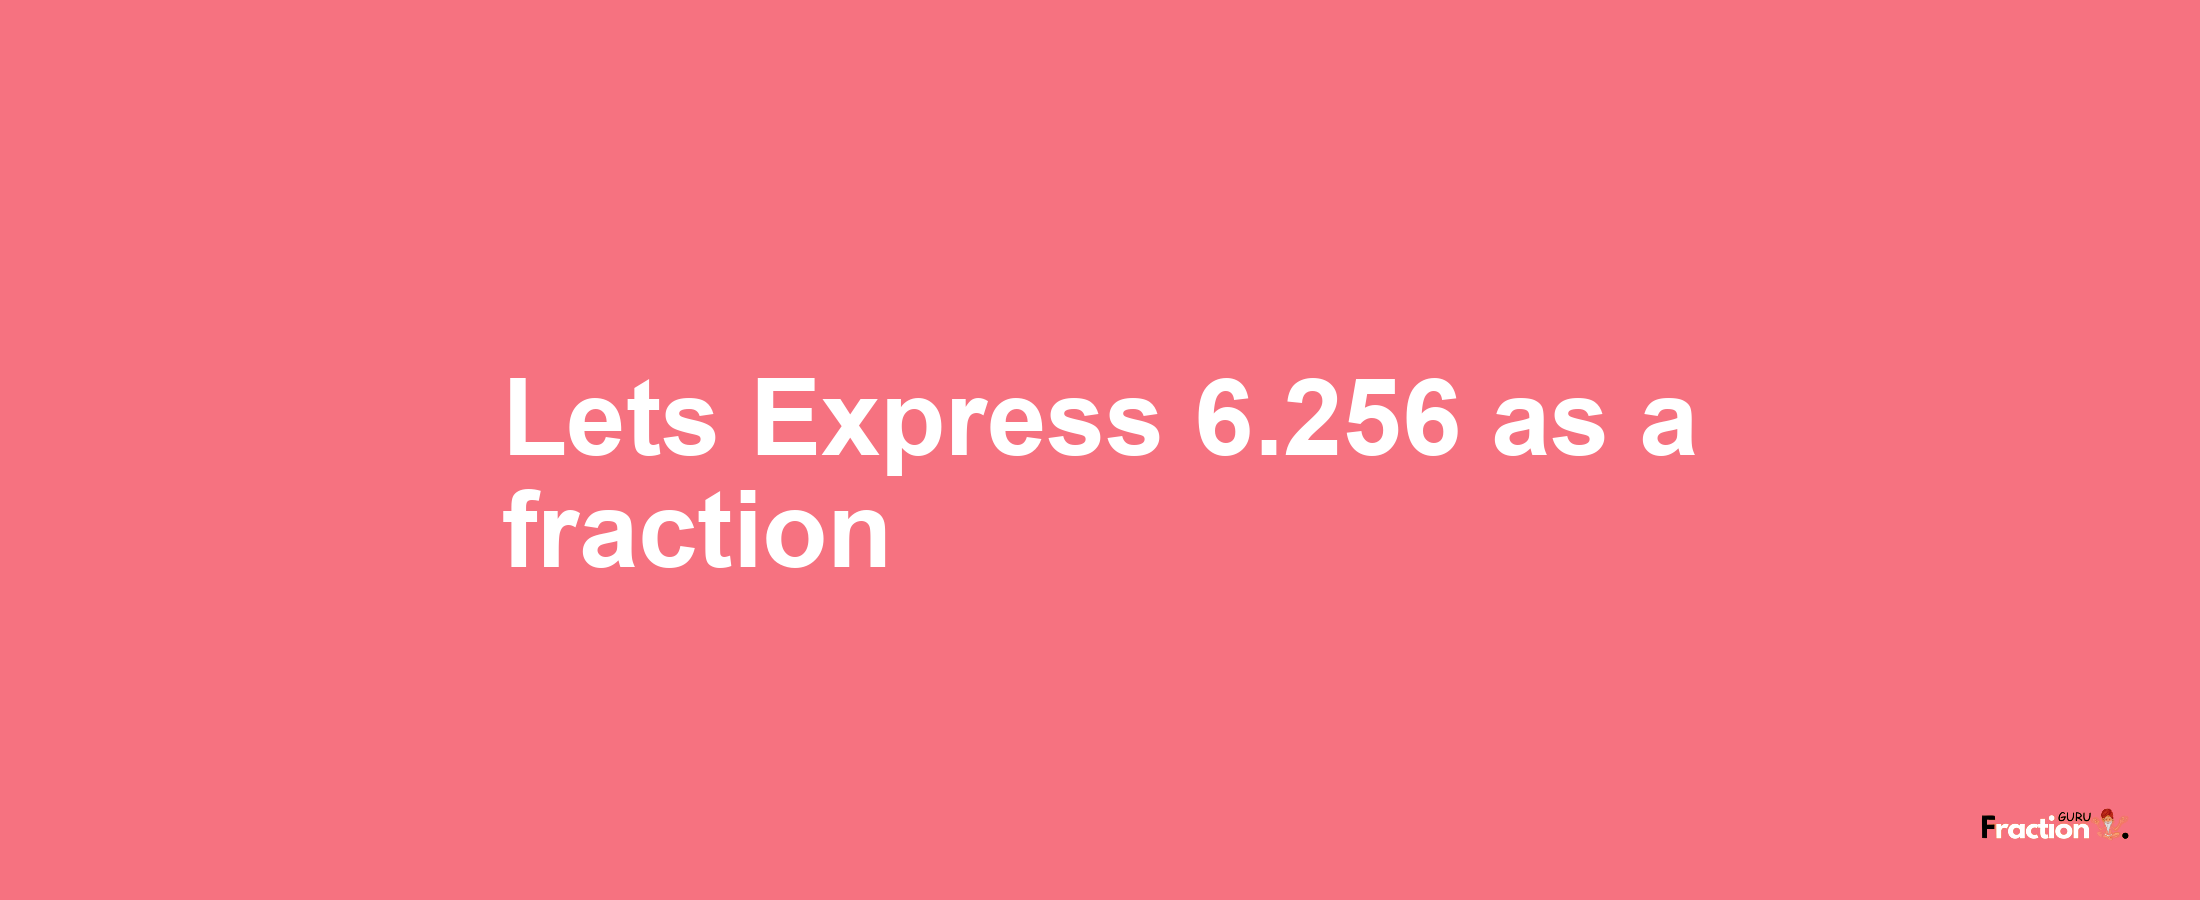 Lets Express 6.256 as afraction